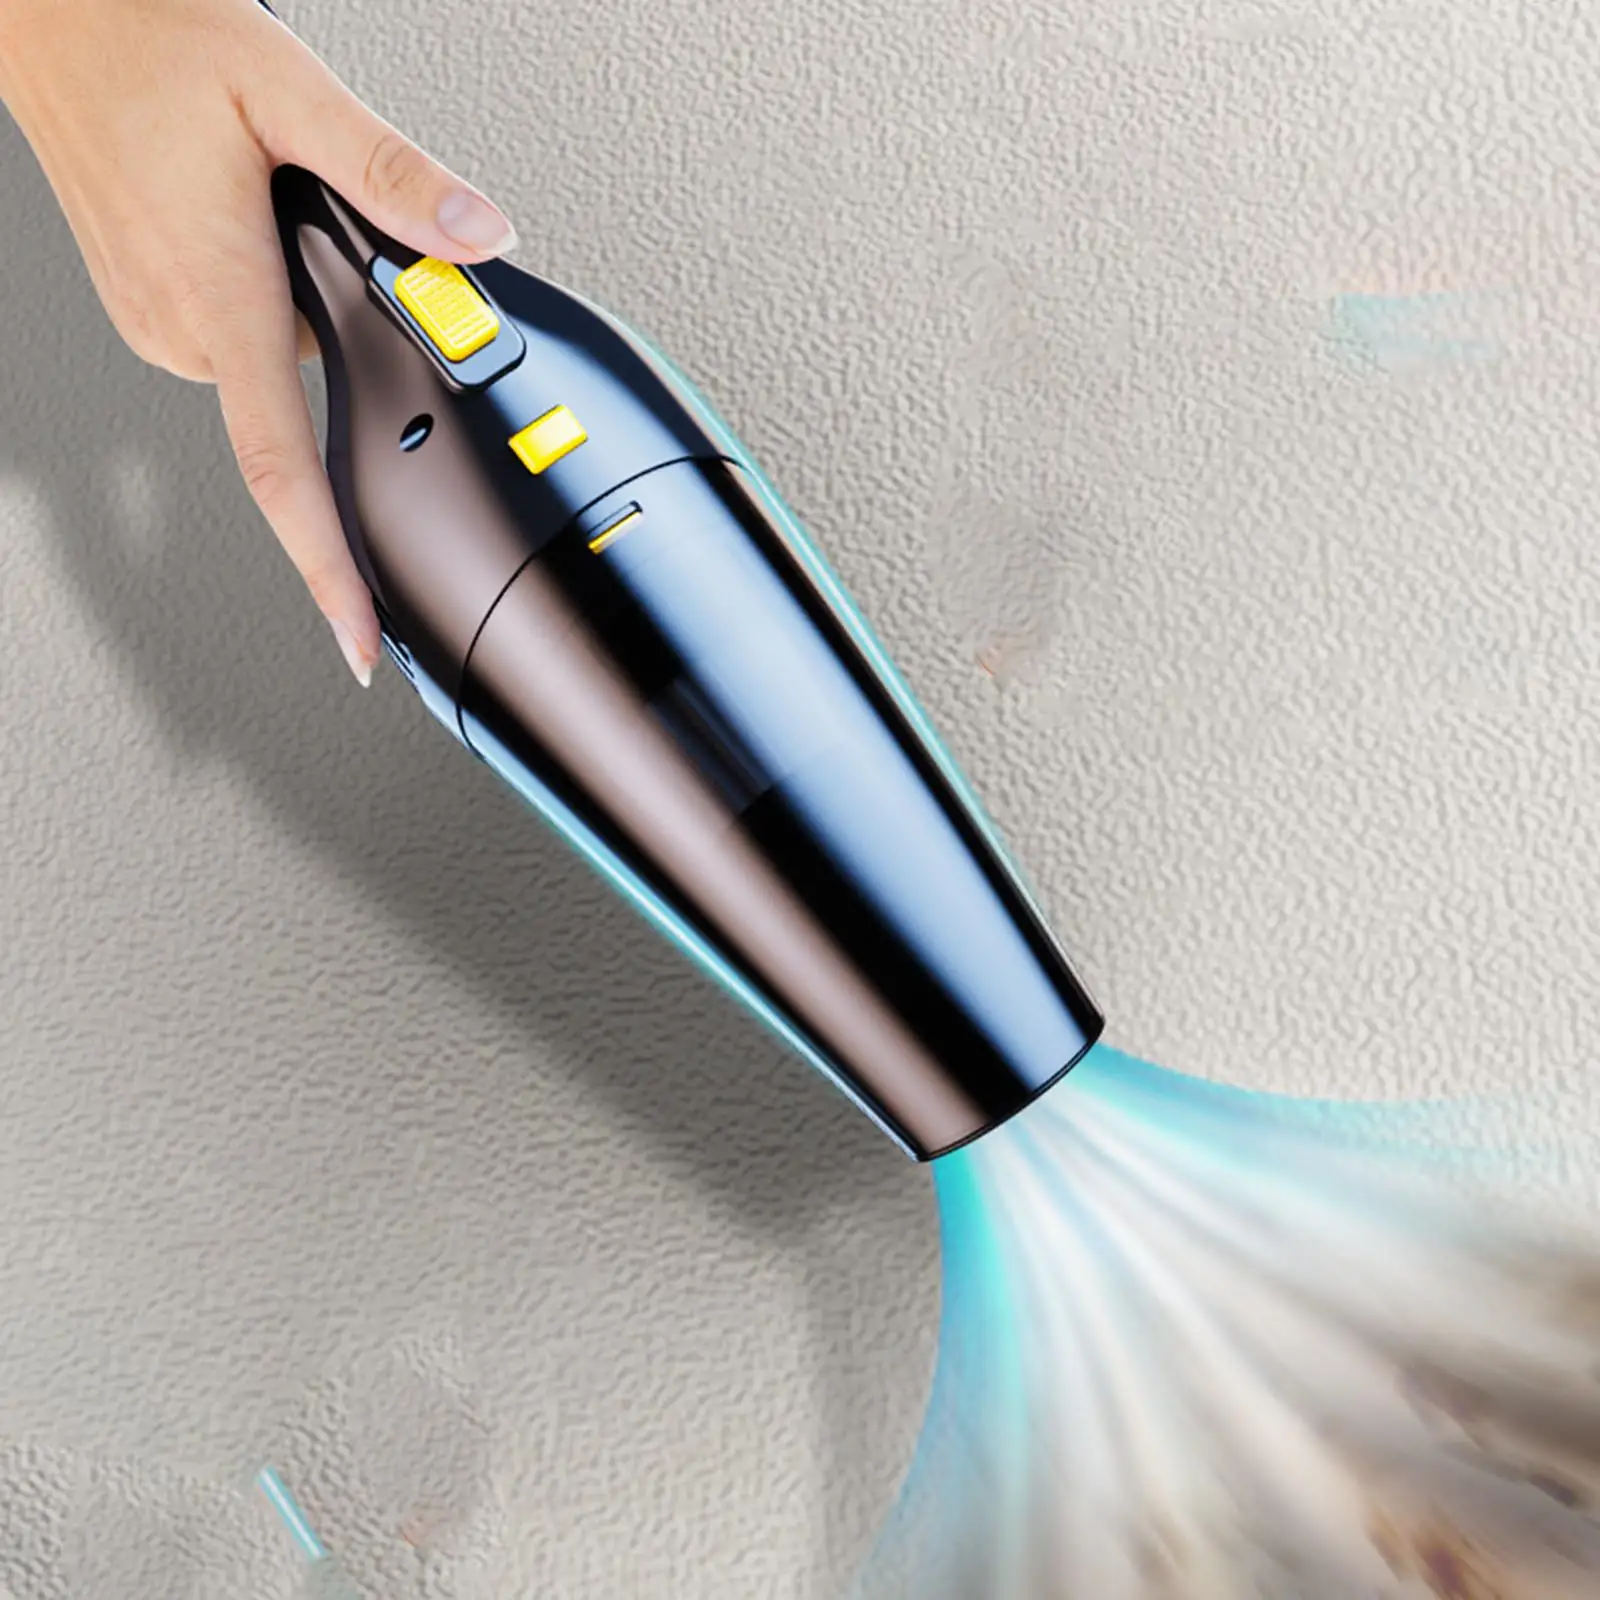 Handhold Car Vacuum Cleaner Wireless Powerful Car Cleaner Quick Chargeable Home Office Sofa Vacuum Cleaner